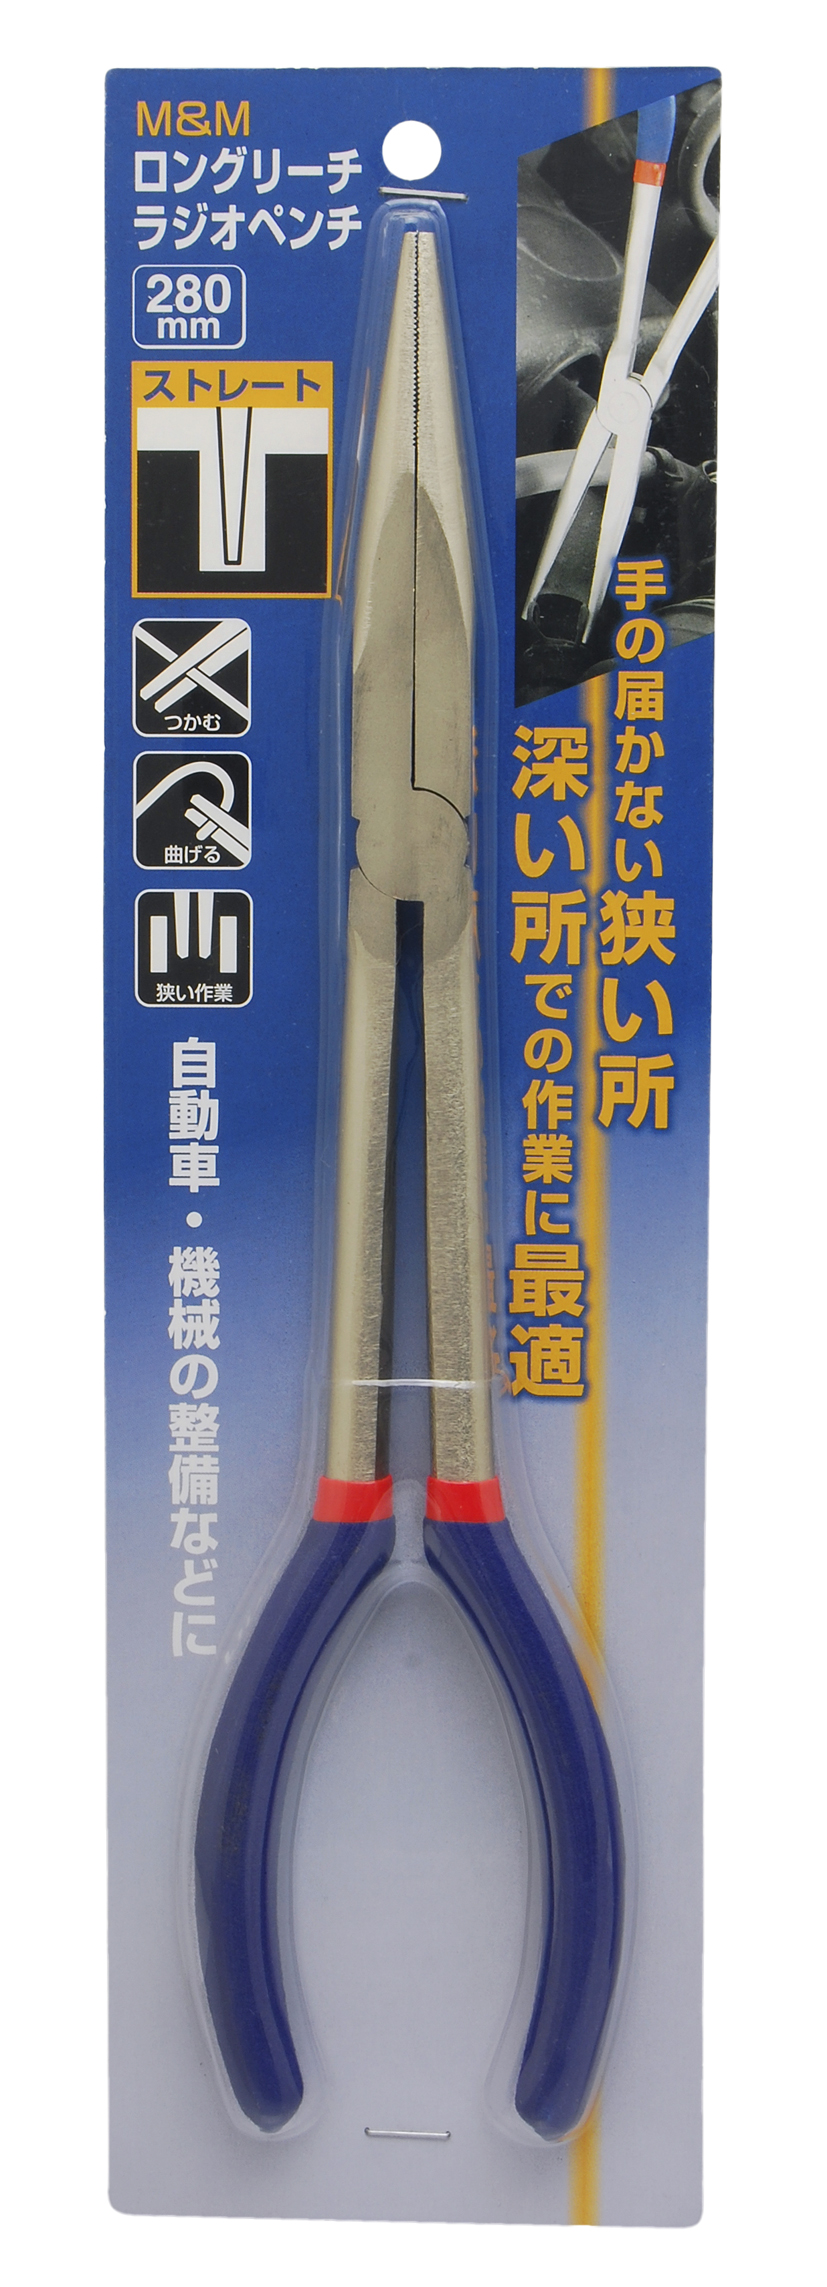 Long Reach Long-Nose Pliers, Straight 280 mm